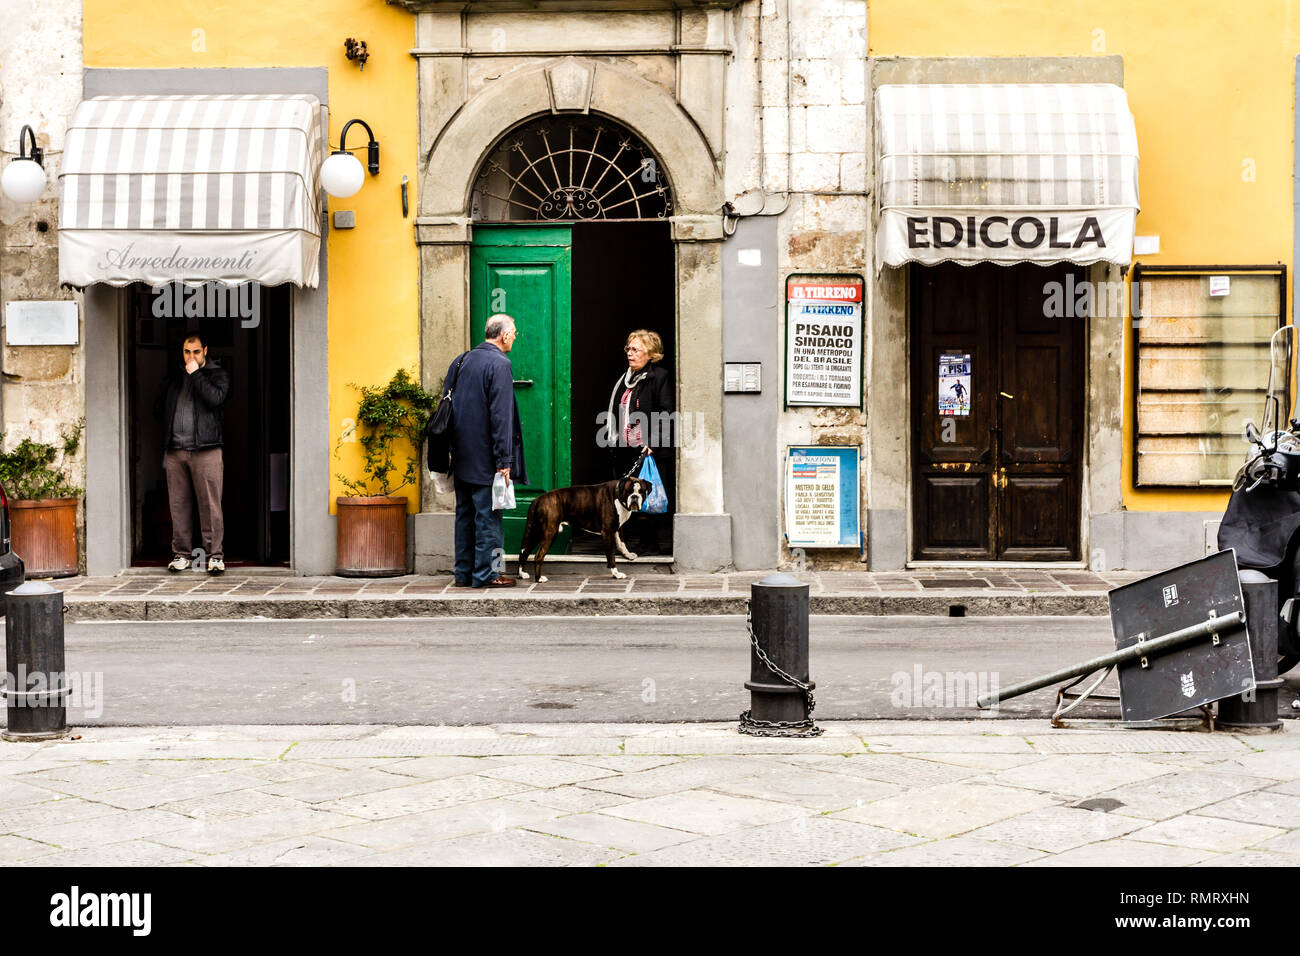 Pisa, Italy - March 17, 2012: Neighbors talking near the house on the street in the city of Pisa. Stock Photo